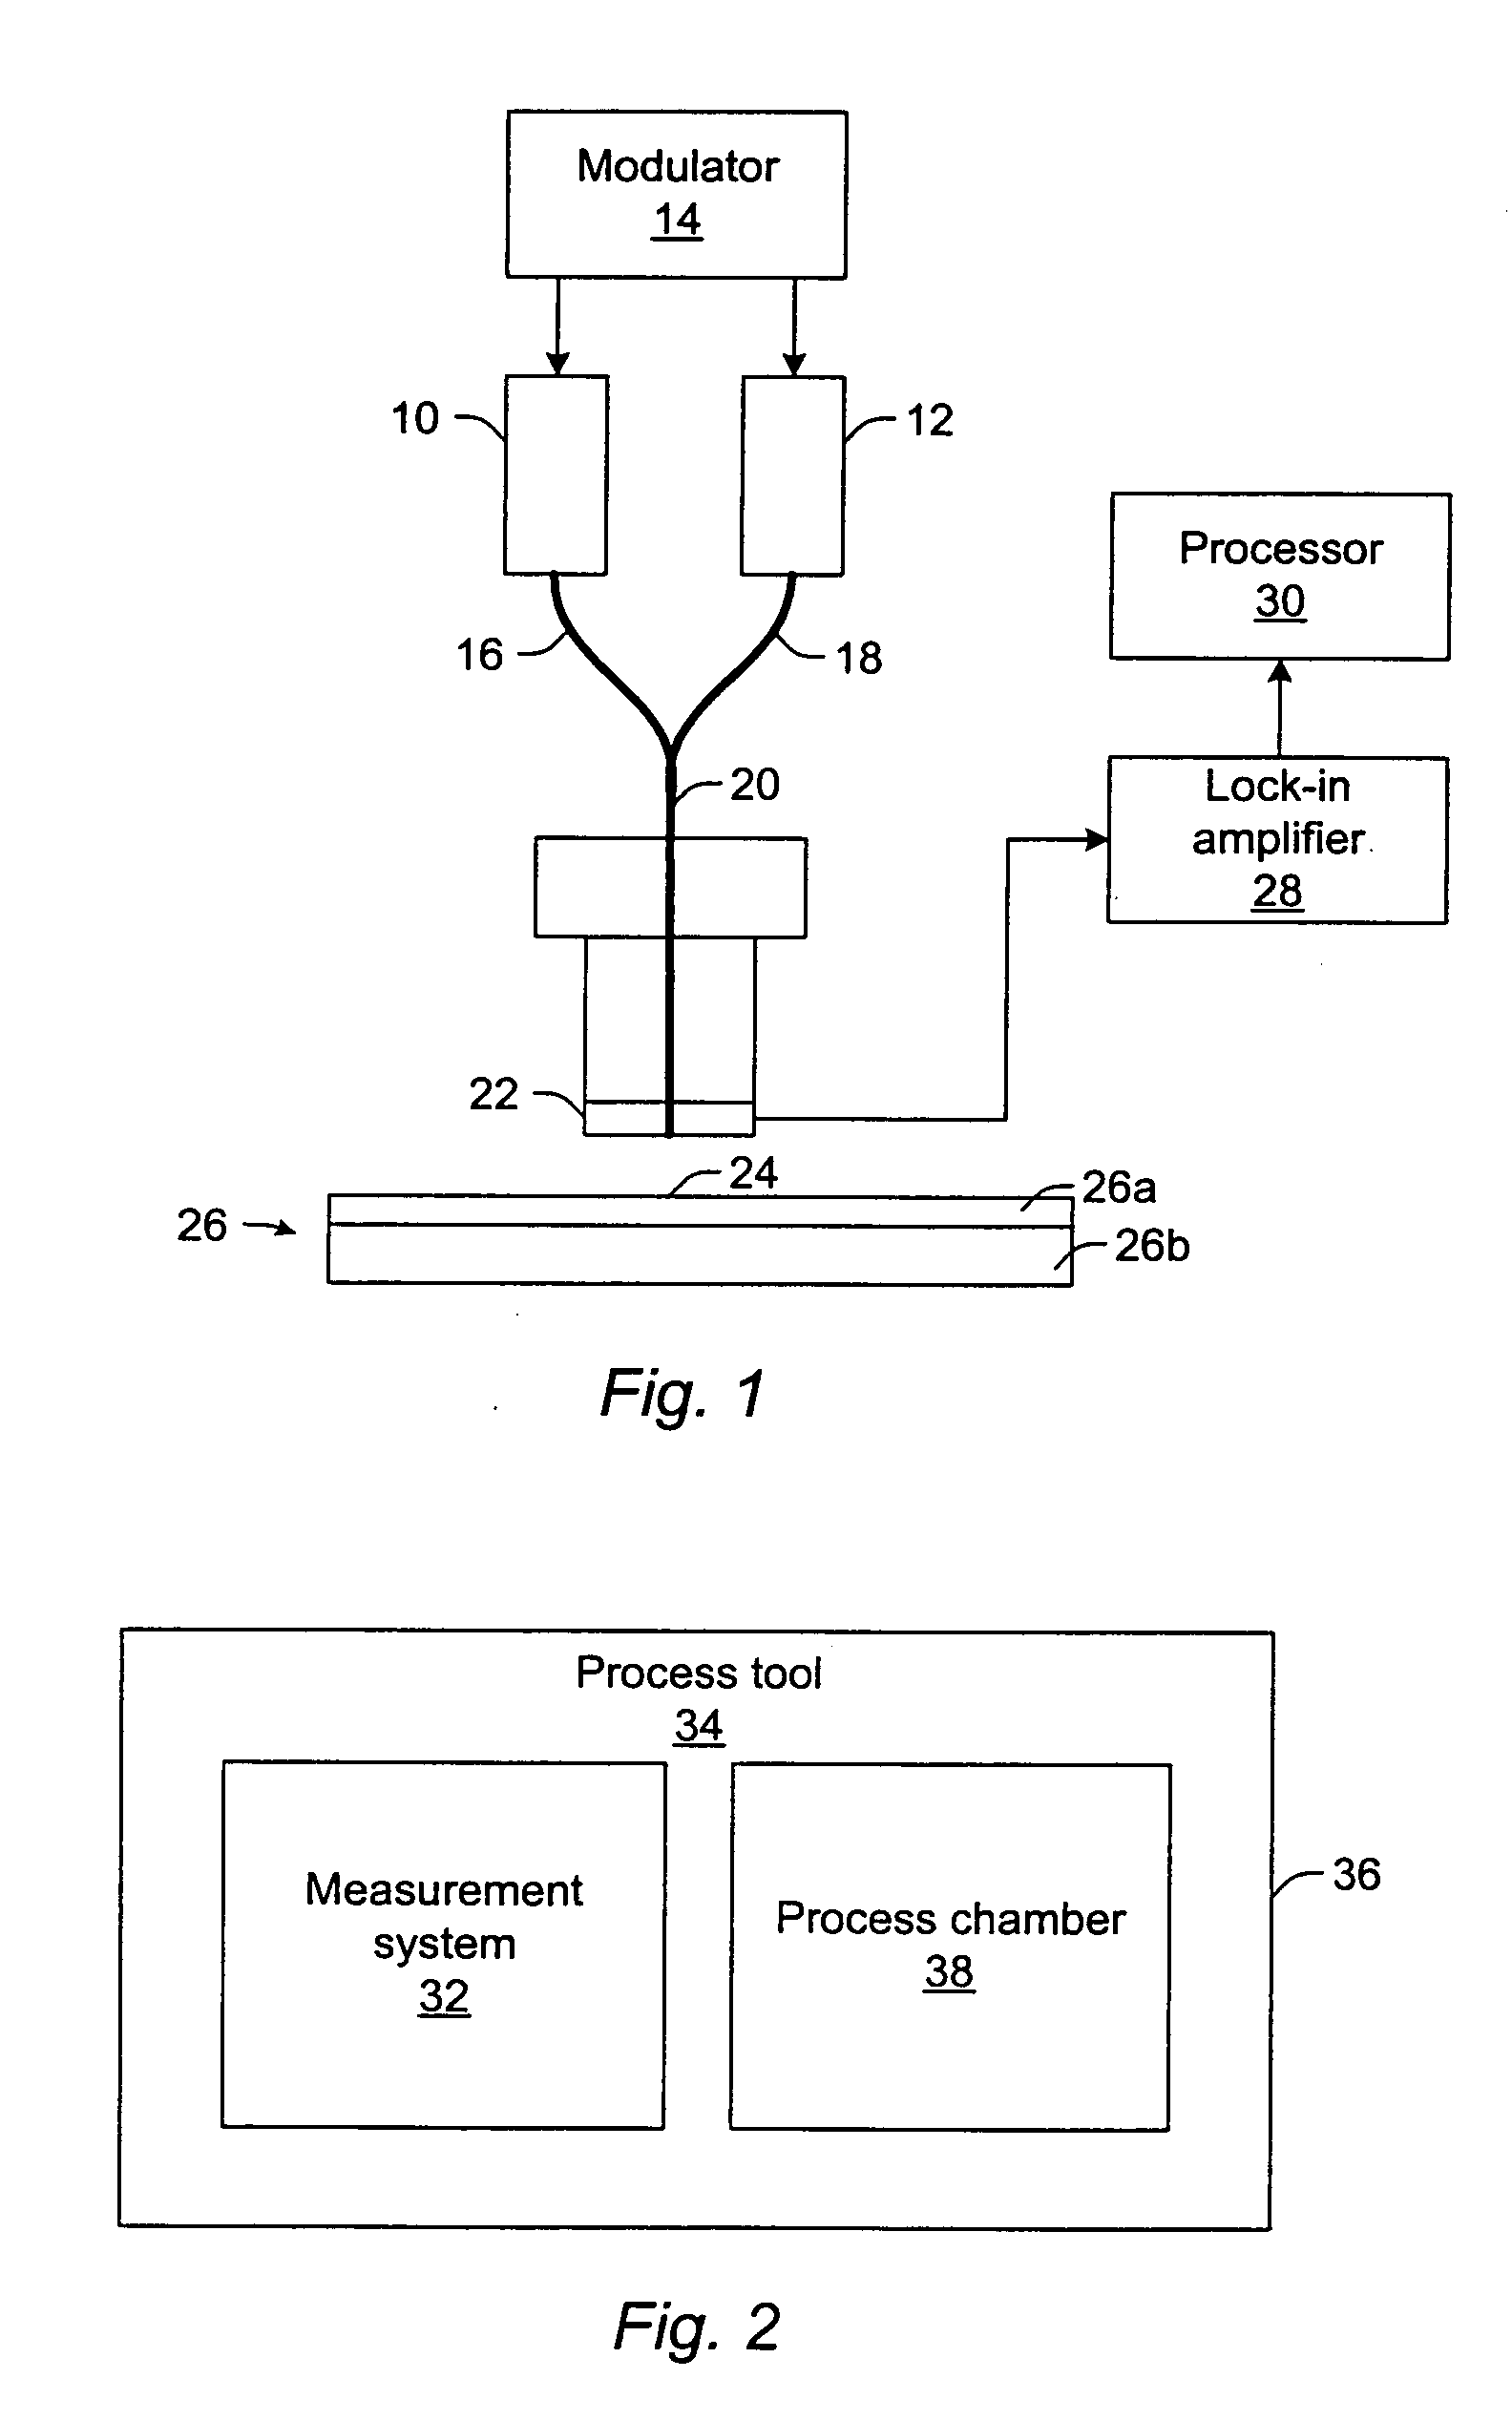 Methods and systems for determining one or more properties of a specimen